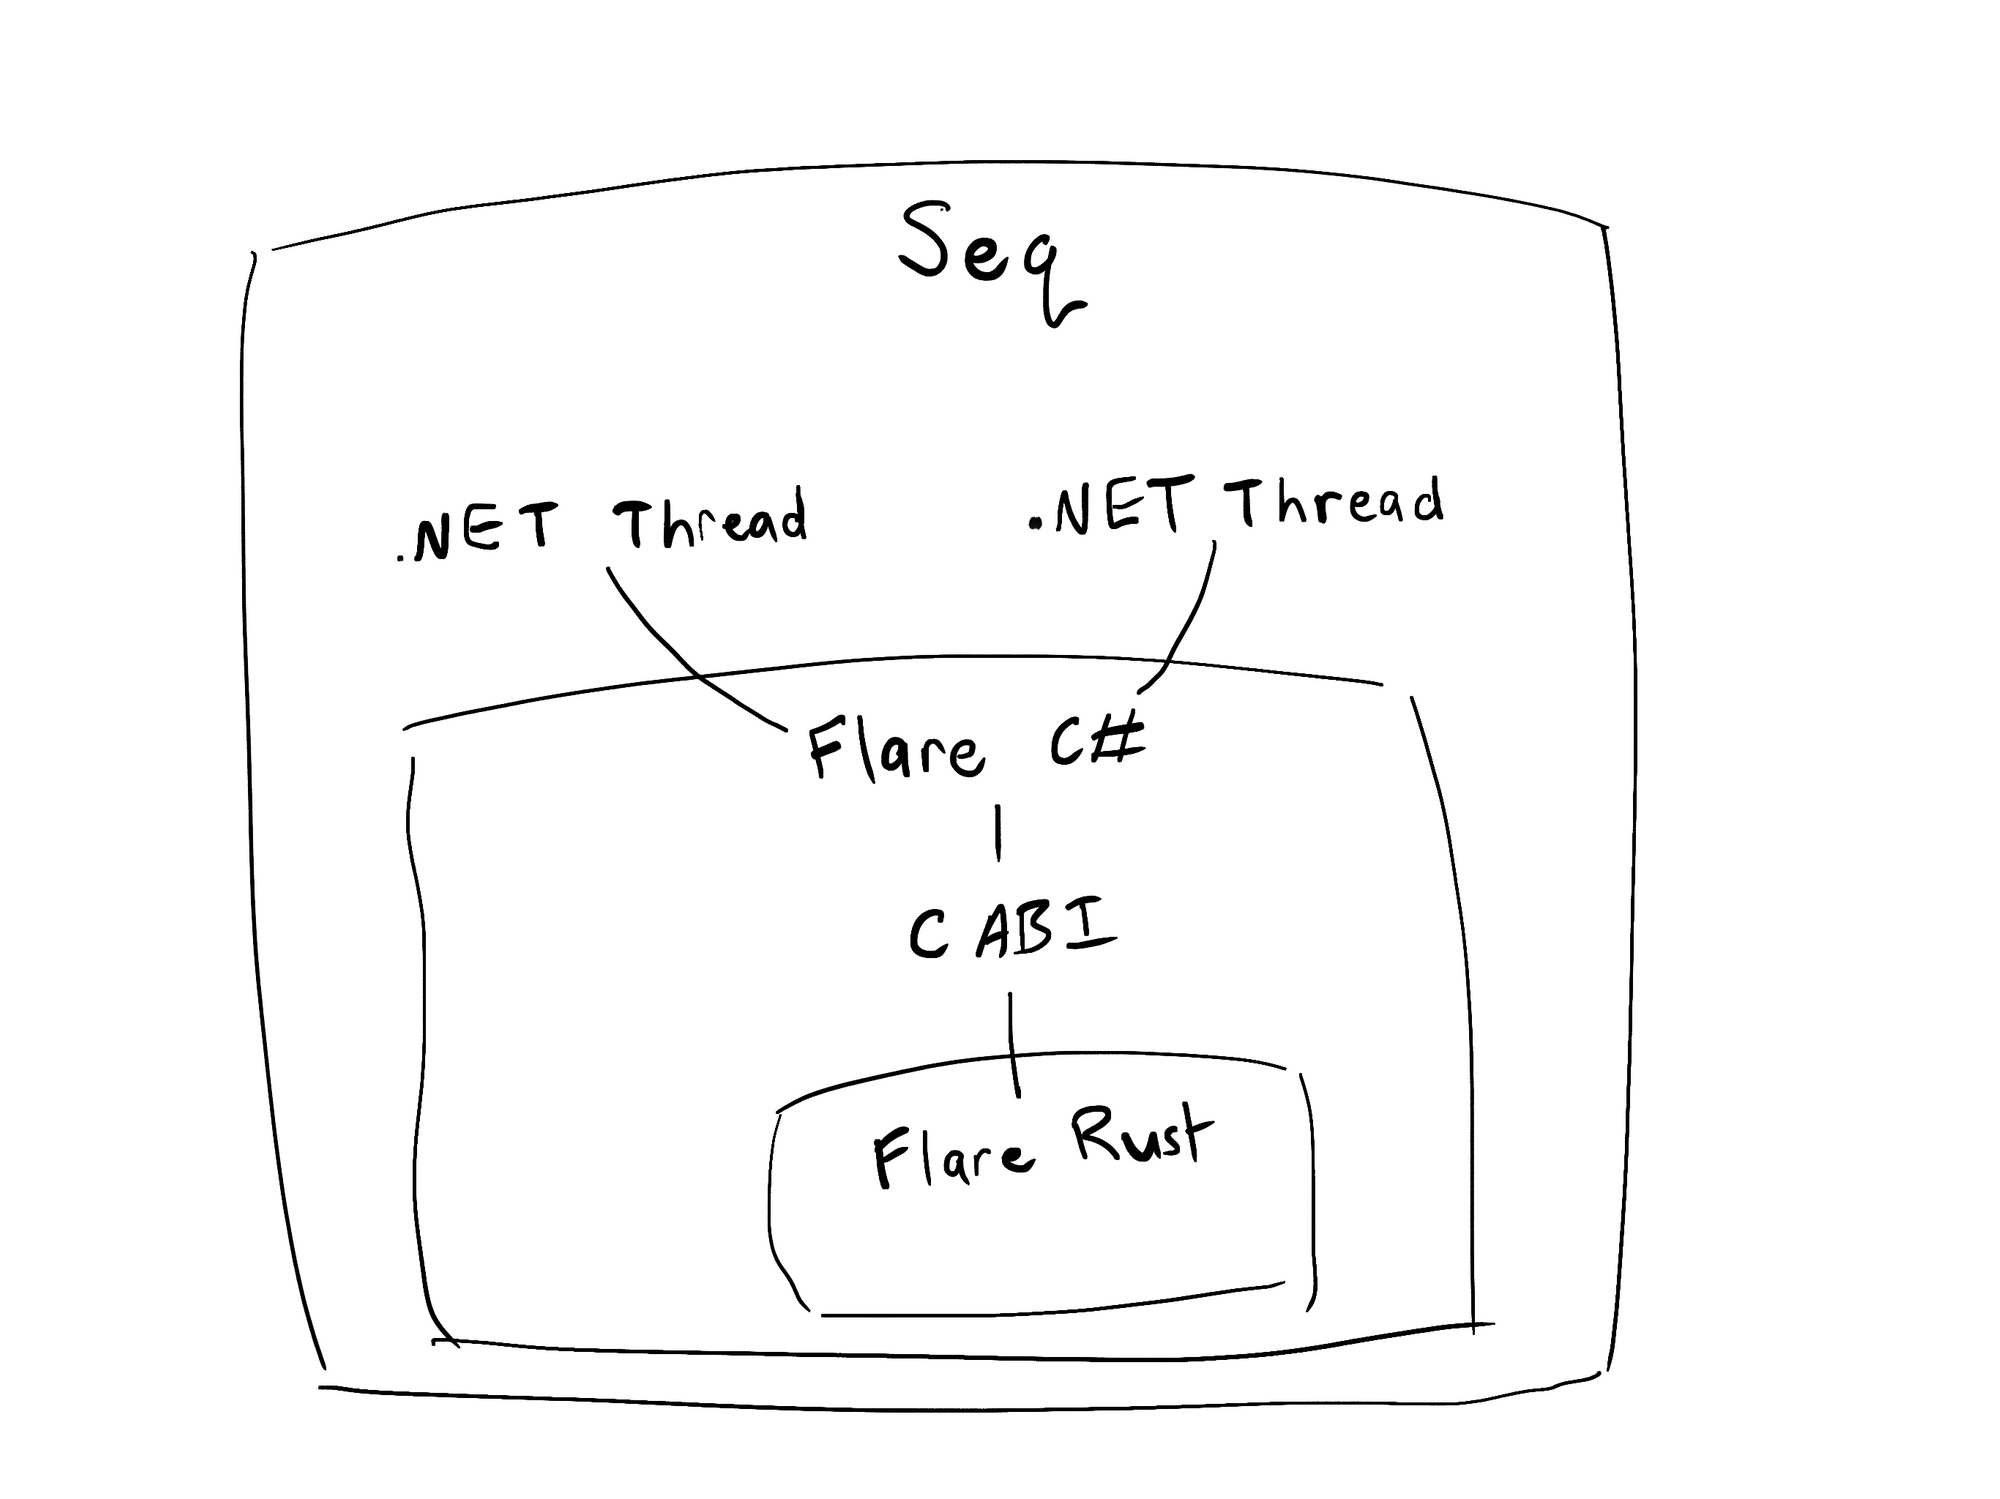 Flare is a combination of C# and Rust components that are used by Seq